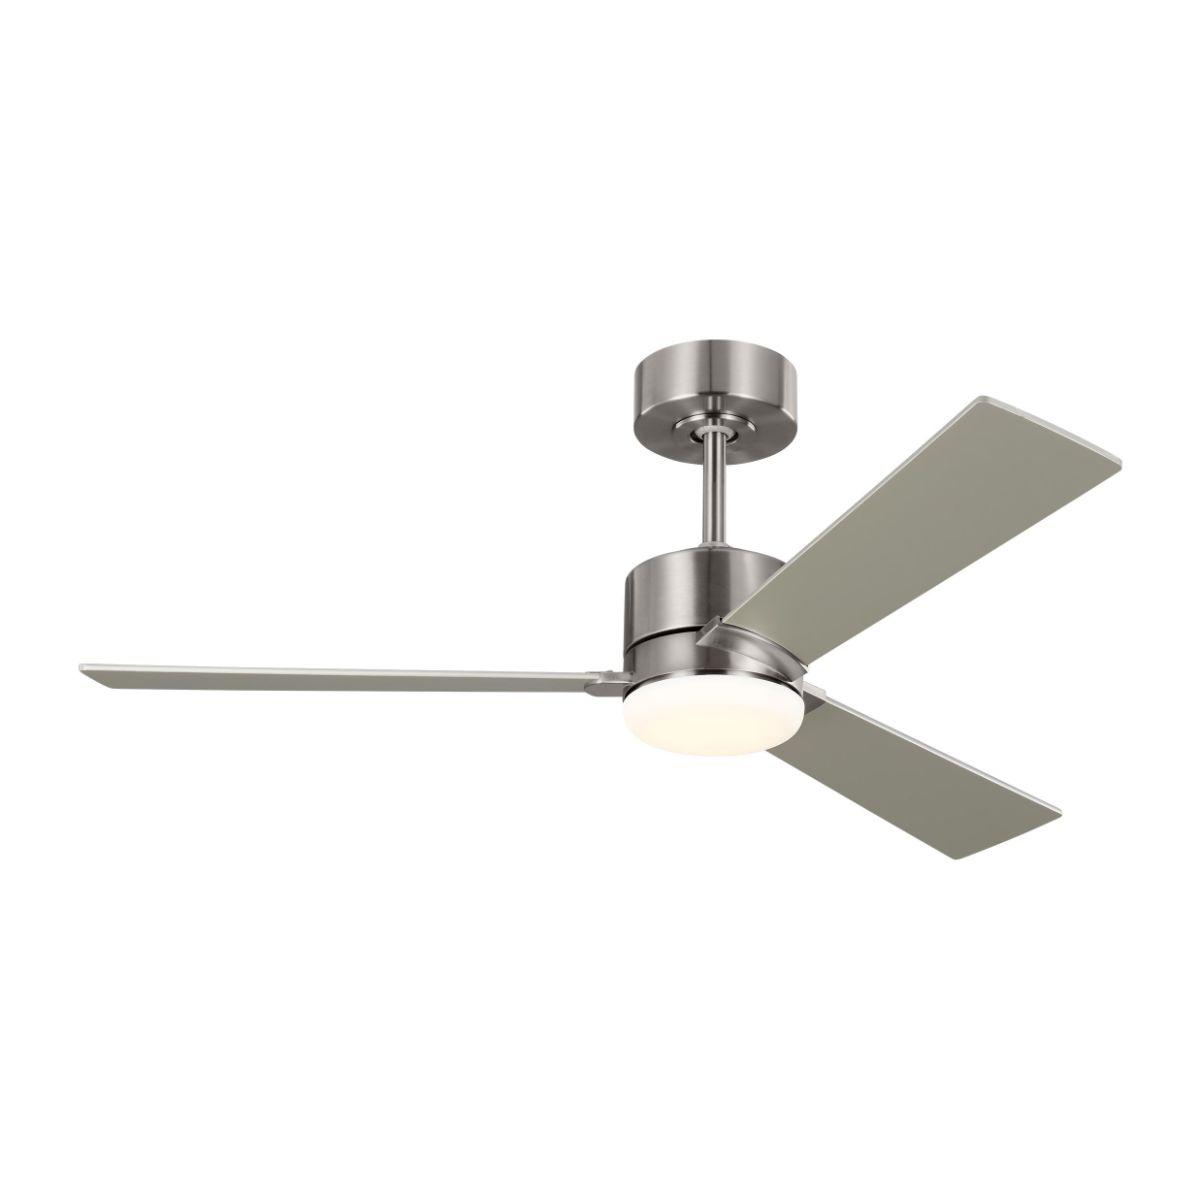 Rozzen 44 Inch DC Motor Ceiling Fan With Remote, Brushed Steel Housing With Silver/American Walnut Reversible Blades - Bees Lighting